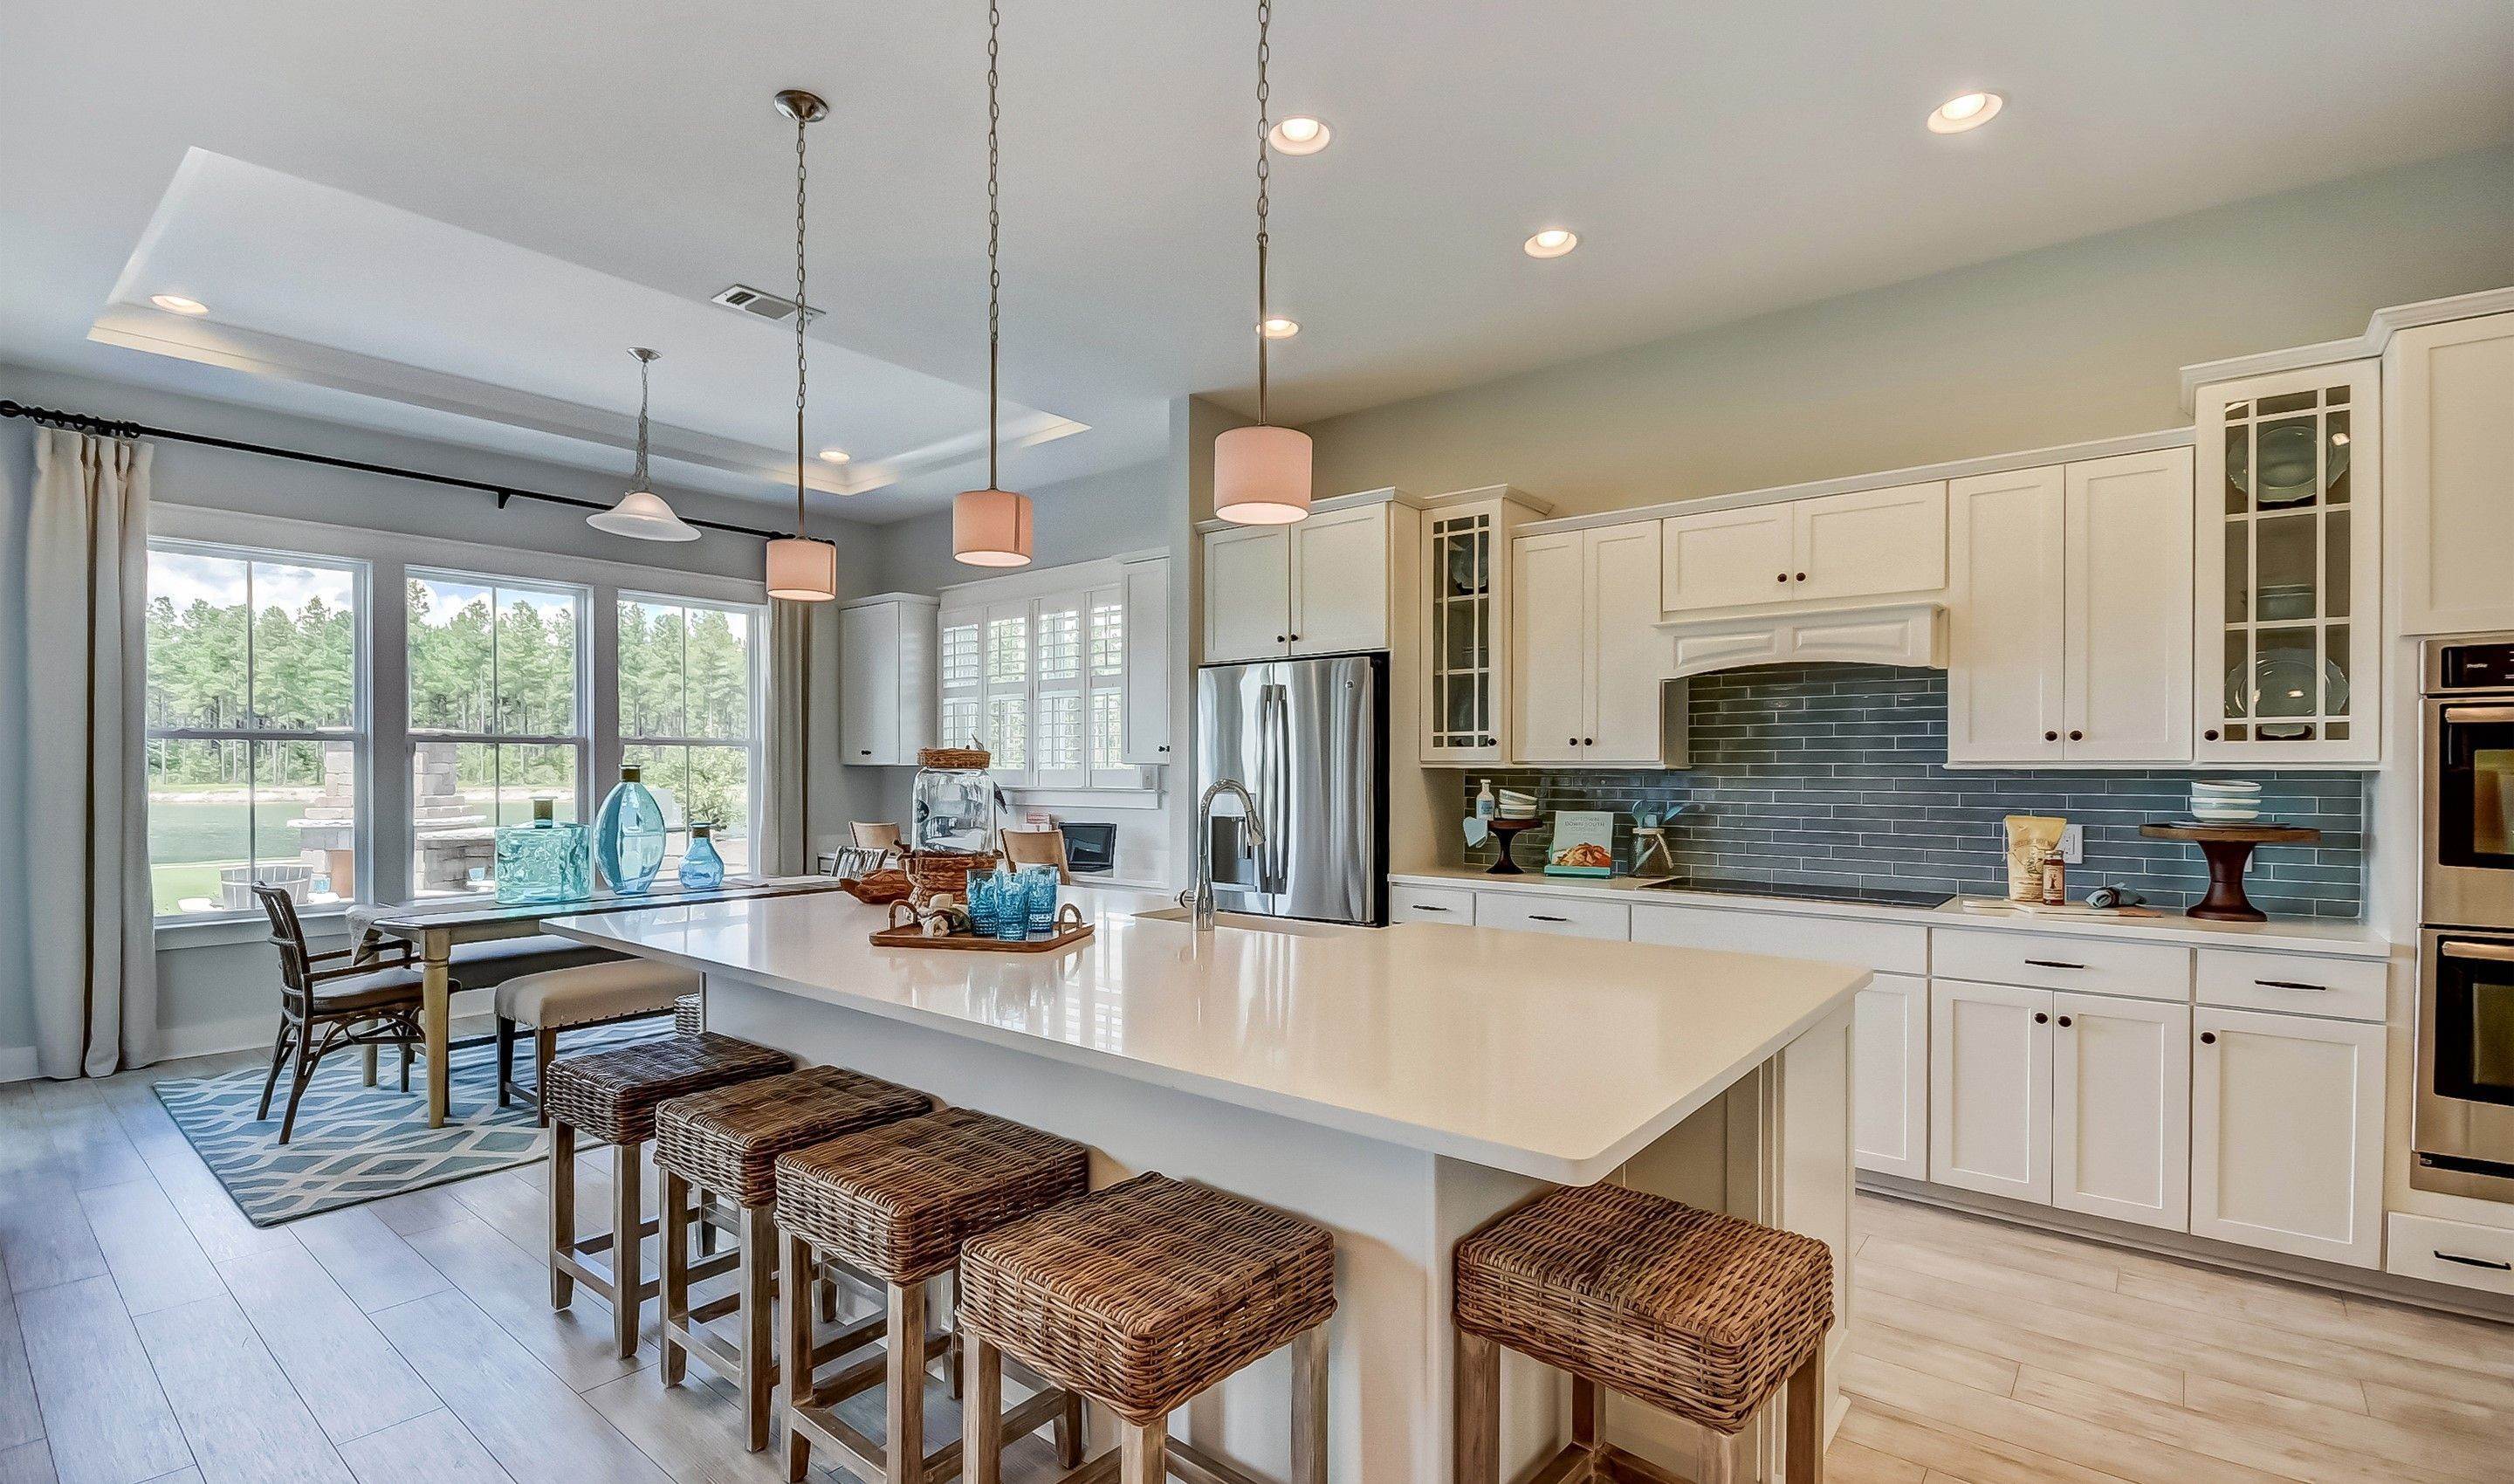 4. K. Hovnanian's® Four Seasons at Lakes of Cane Bay κτίριο σε 109 Magnolia House Drive, Summerville, SC 29486